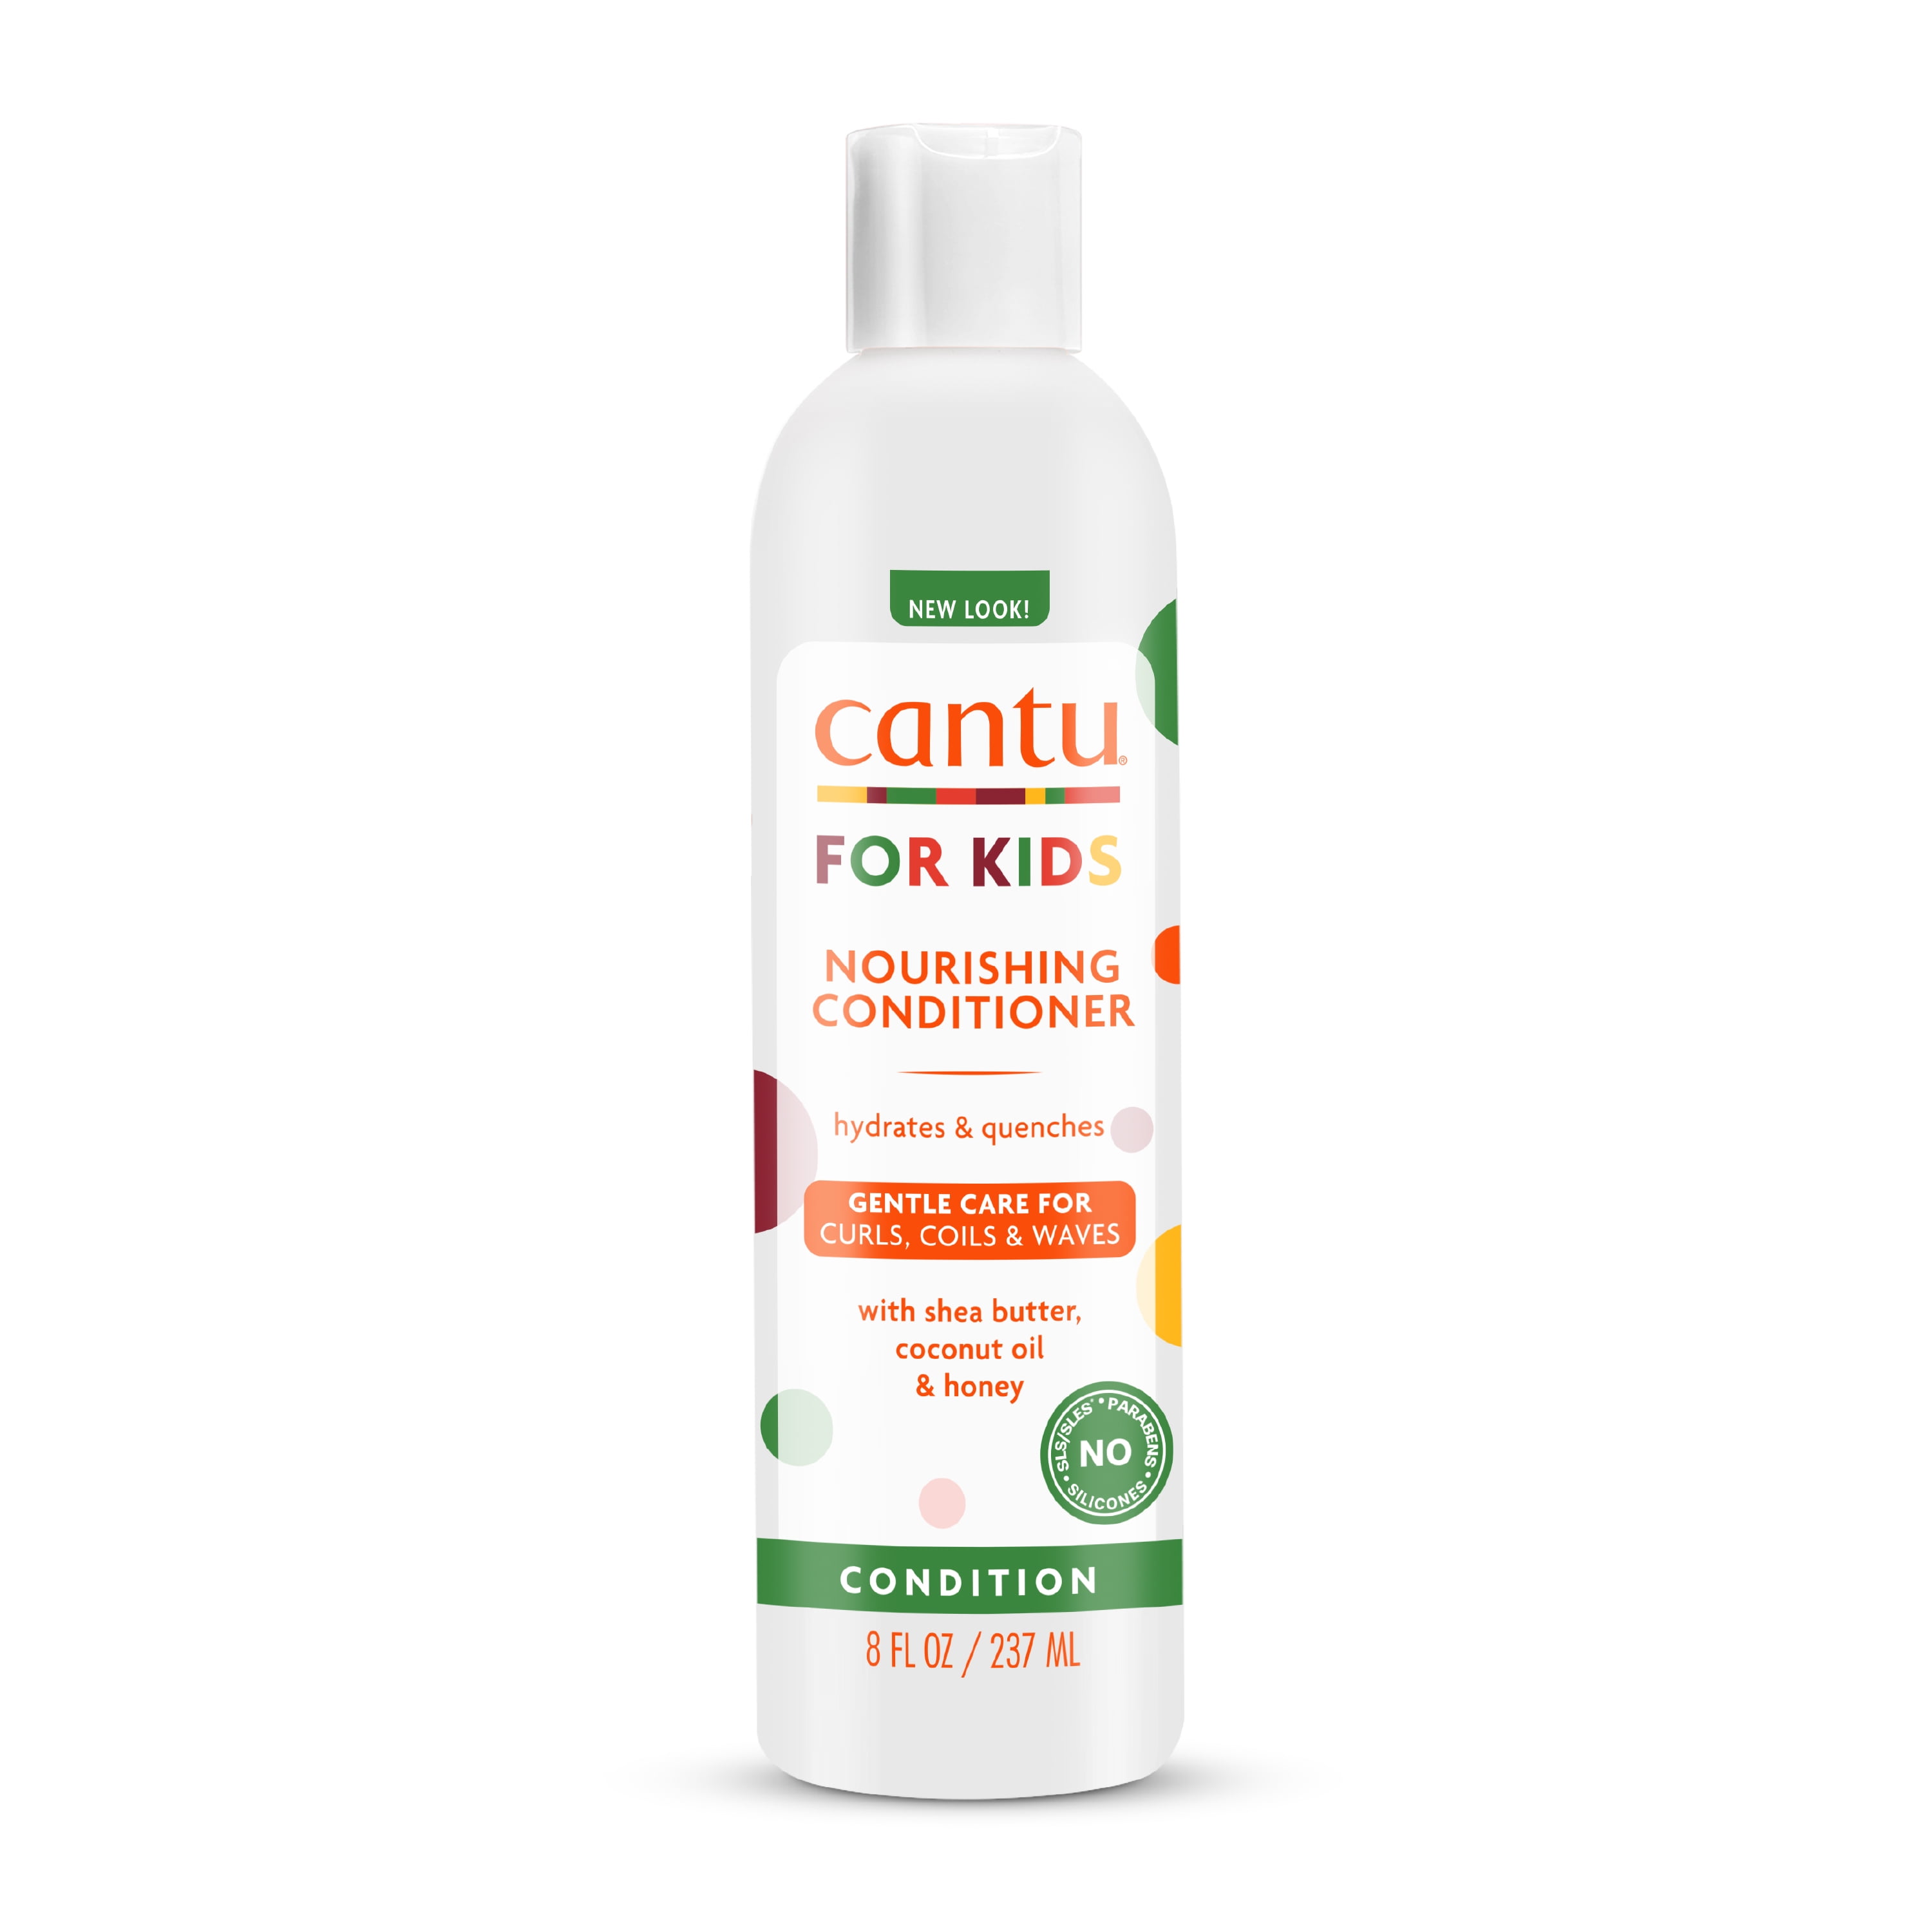 Cantu Care for Kids Nourishing Sulfate-Free Conditioner with Shea Butter, 8 fl oz